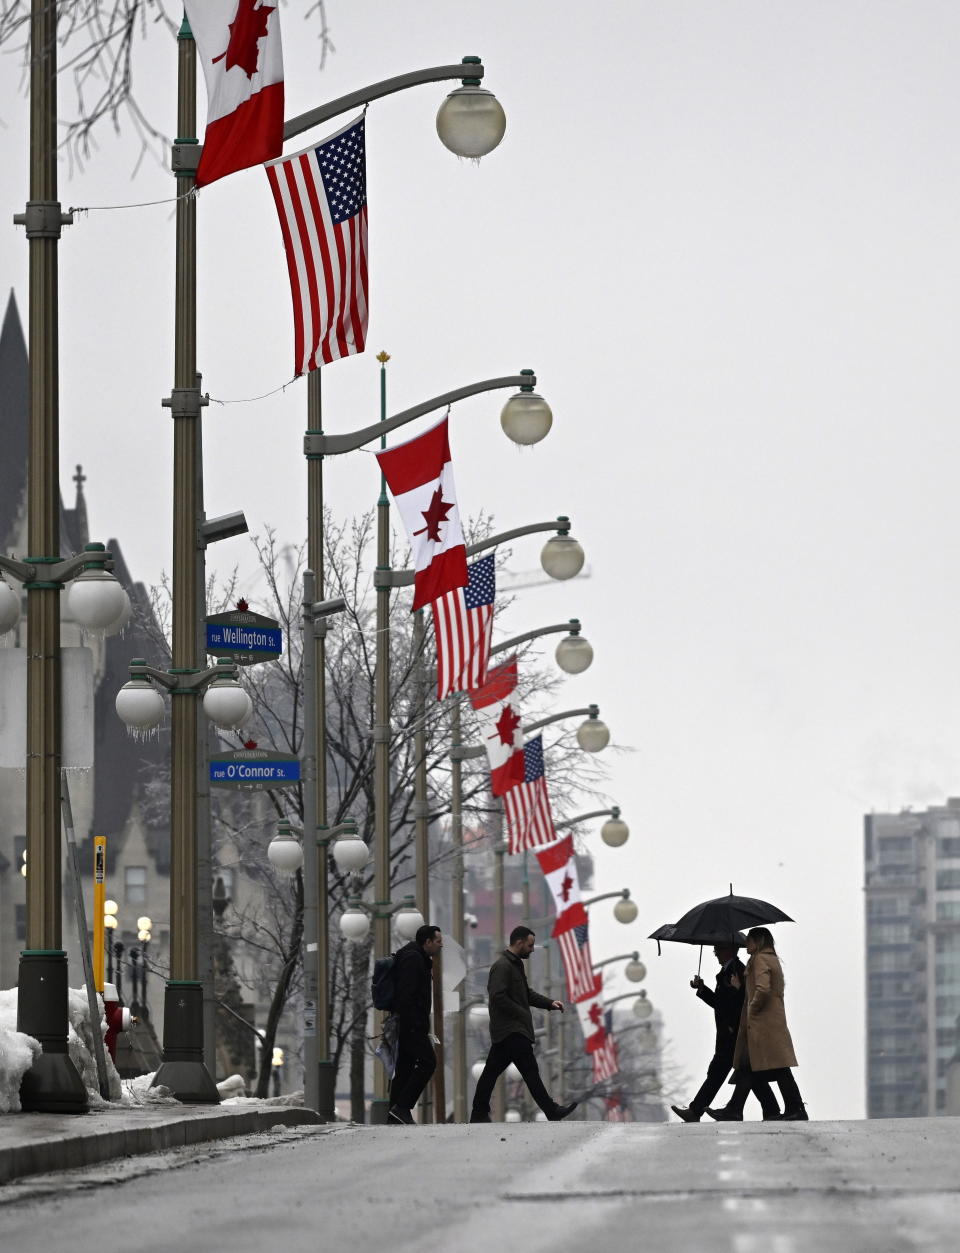 People hold umbrellas as they pass Canadian and American flags lining Wellington Street in front of Parliament Hill in Ottawa, before the visit of U.S. President Joe Biden to Canada, on Thursday, March 23, 2023. (Justin Tang /The Canadian Press via AP)